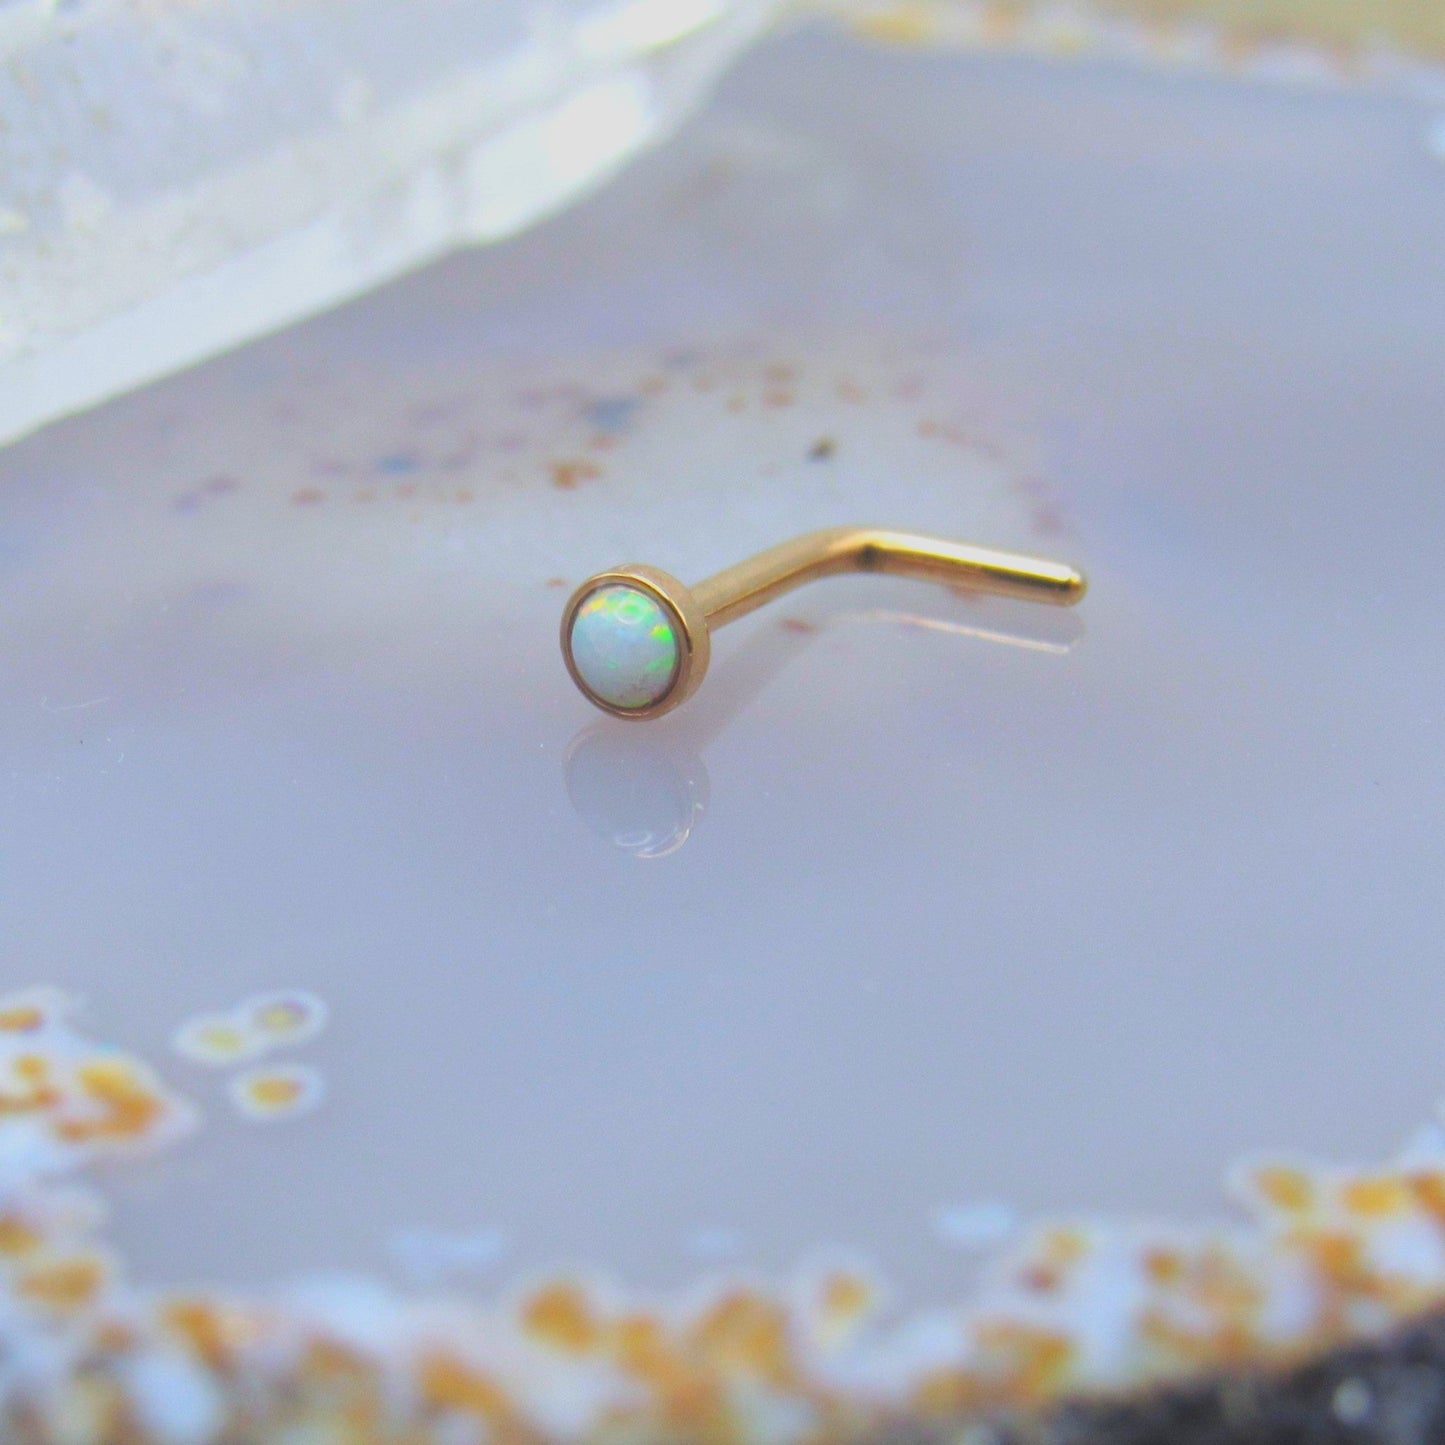 White opal nose piercing ring rose gold L bend nostril piercing body jewelry ring 20g - Siren Body Jewelry